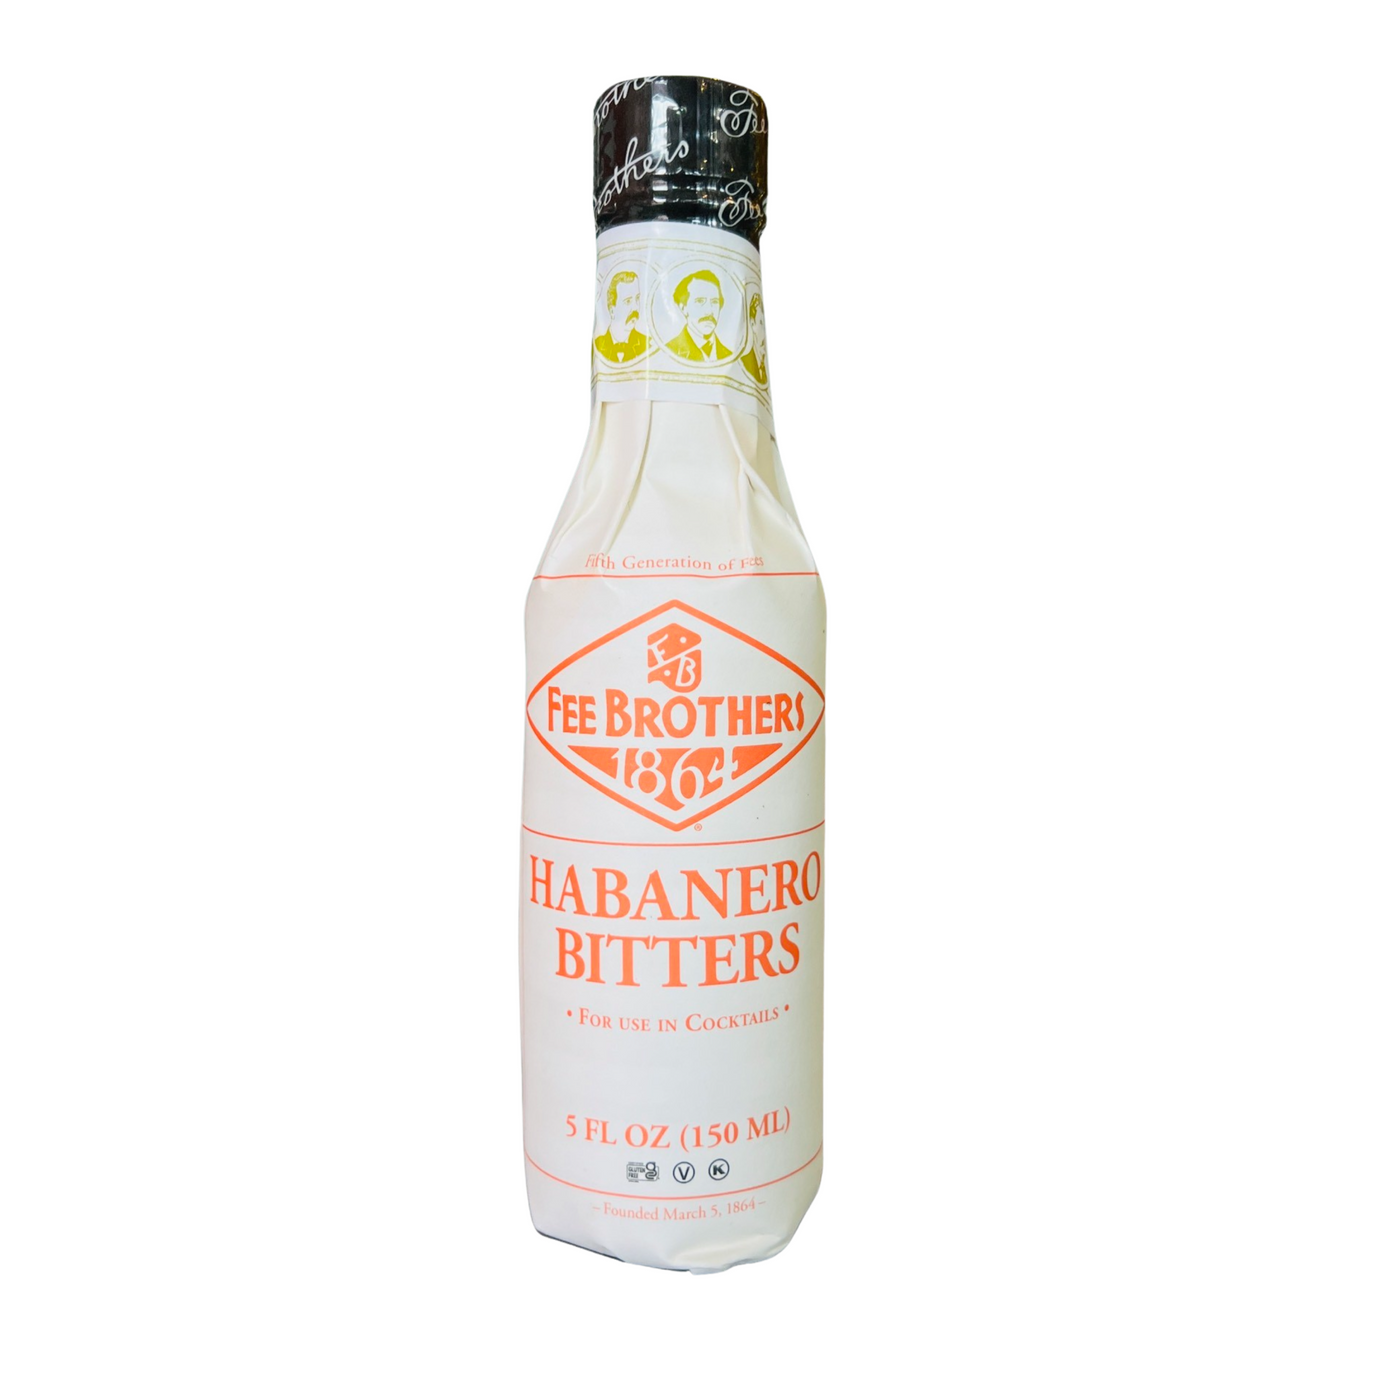 a 5 oz bottle wrapped in a beige branded paper with orange lettering